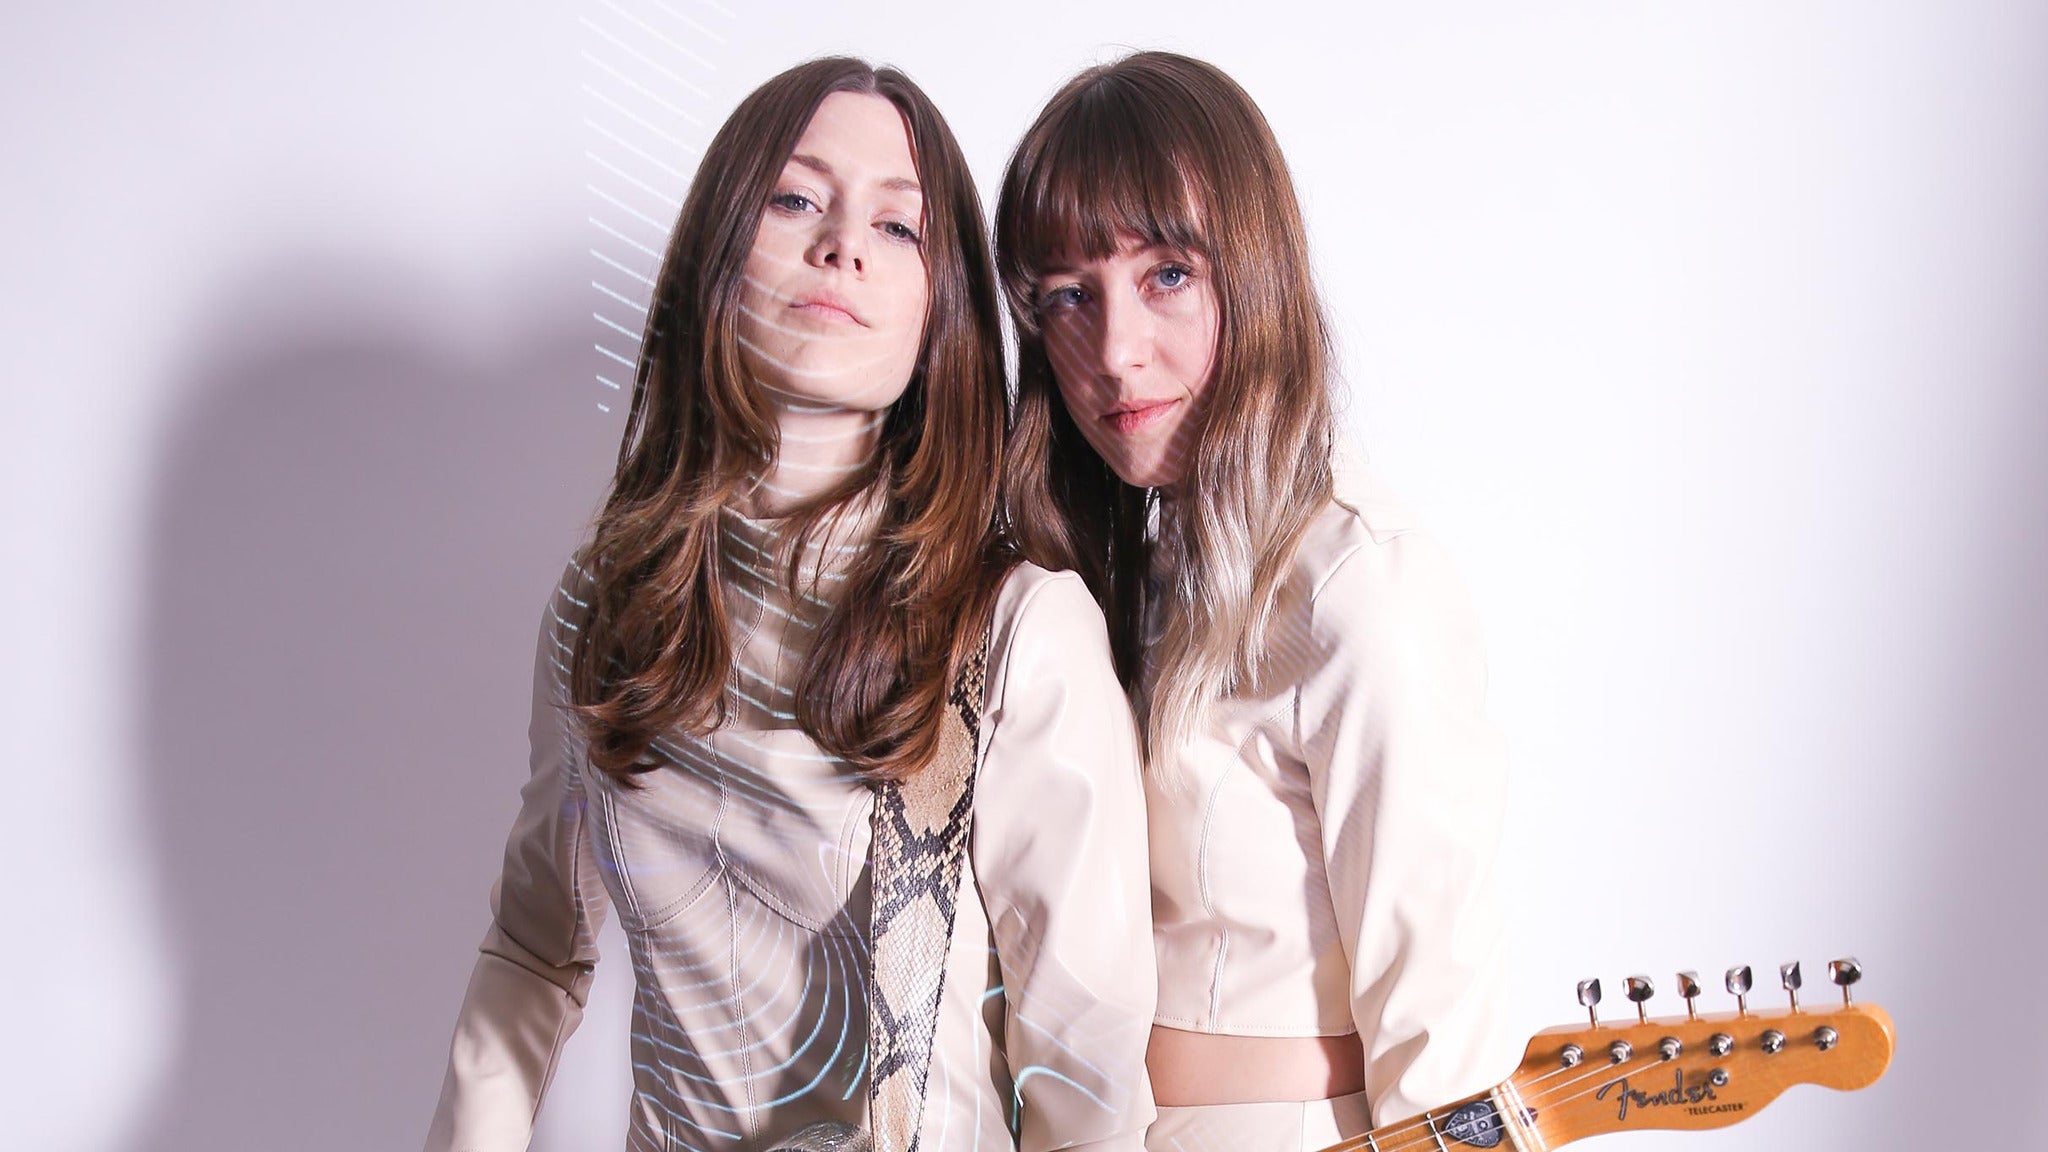 Larkin Poe - Blood Harmony Tour pre-sale password for your tickets in San Diego